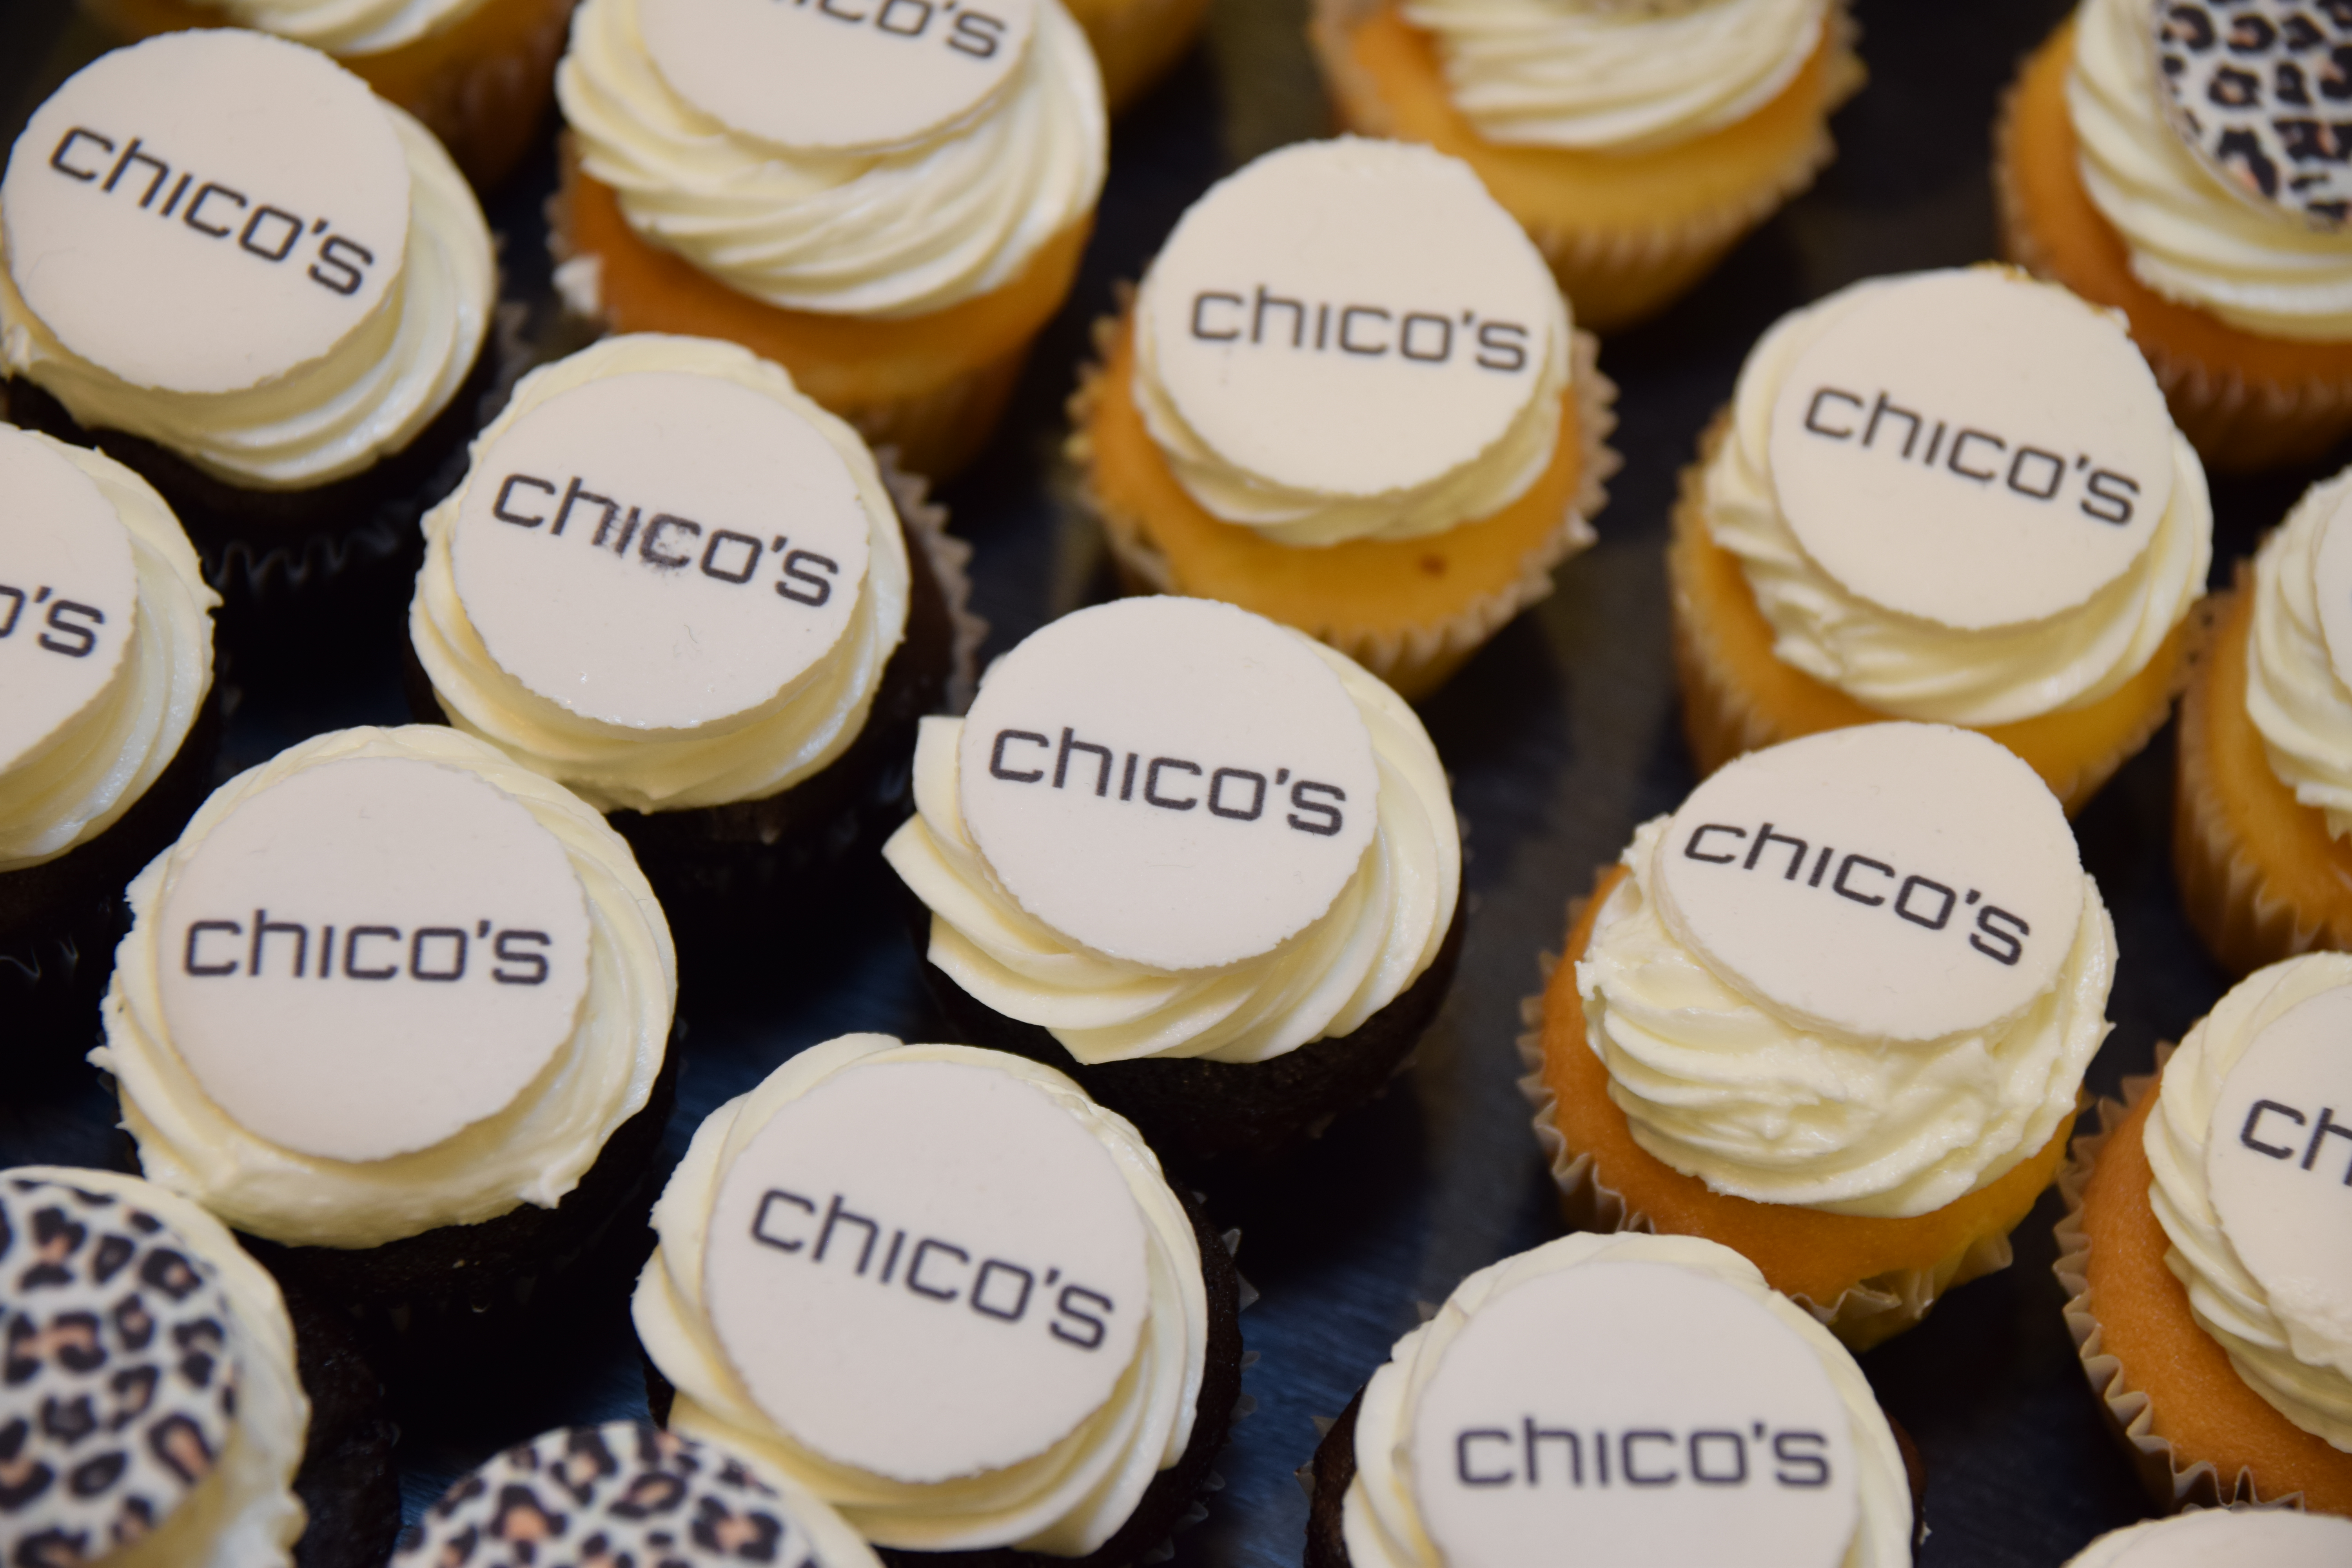 #lovechicos; Chico's cupcakes; Chico's NYC MeetUp